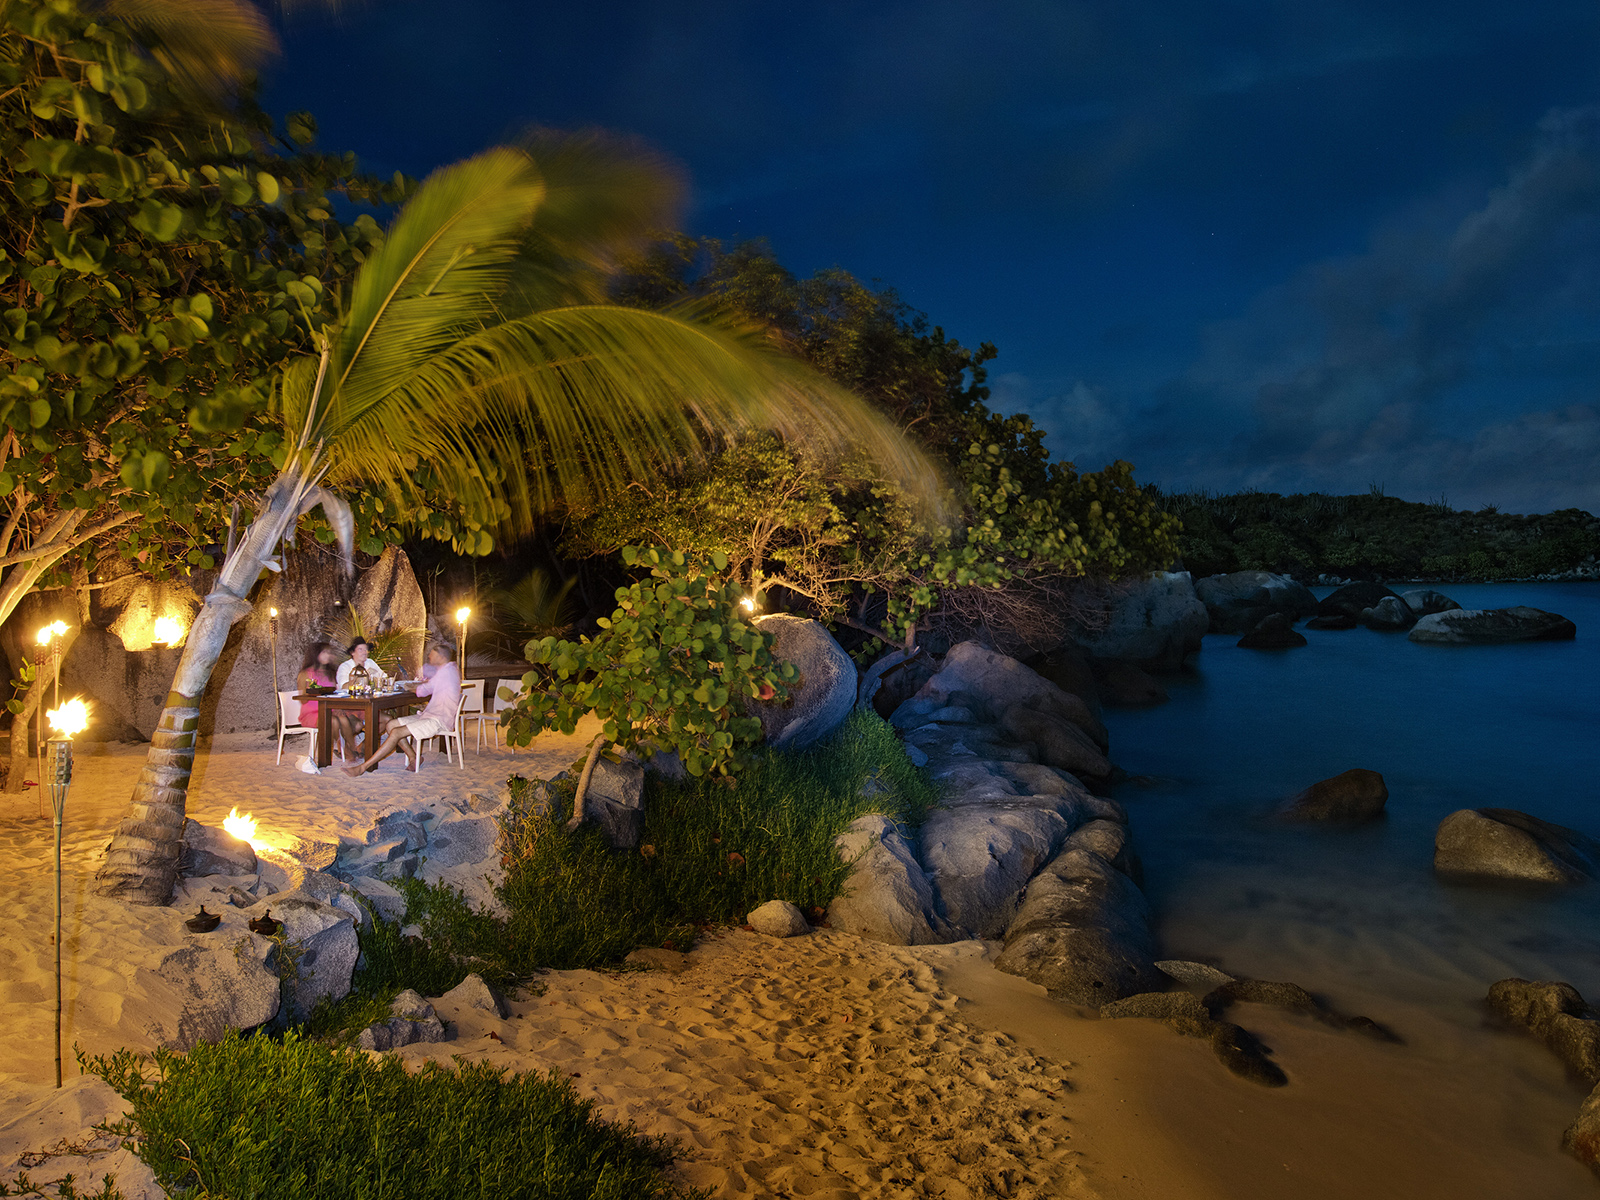 Secluded dining on the beach at night